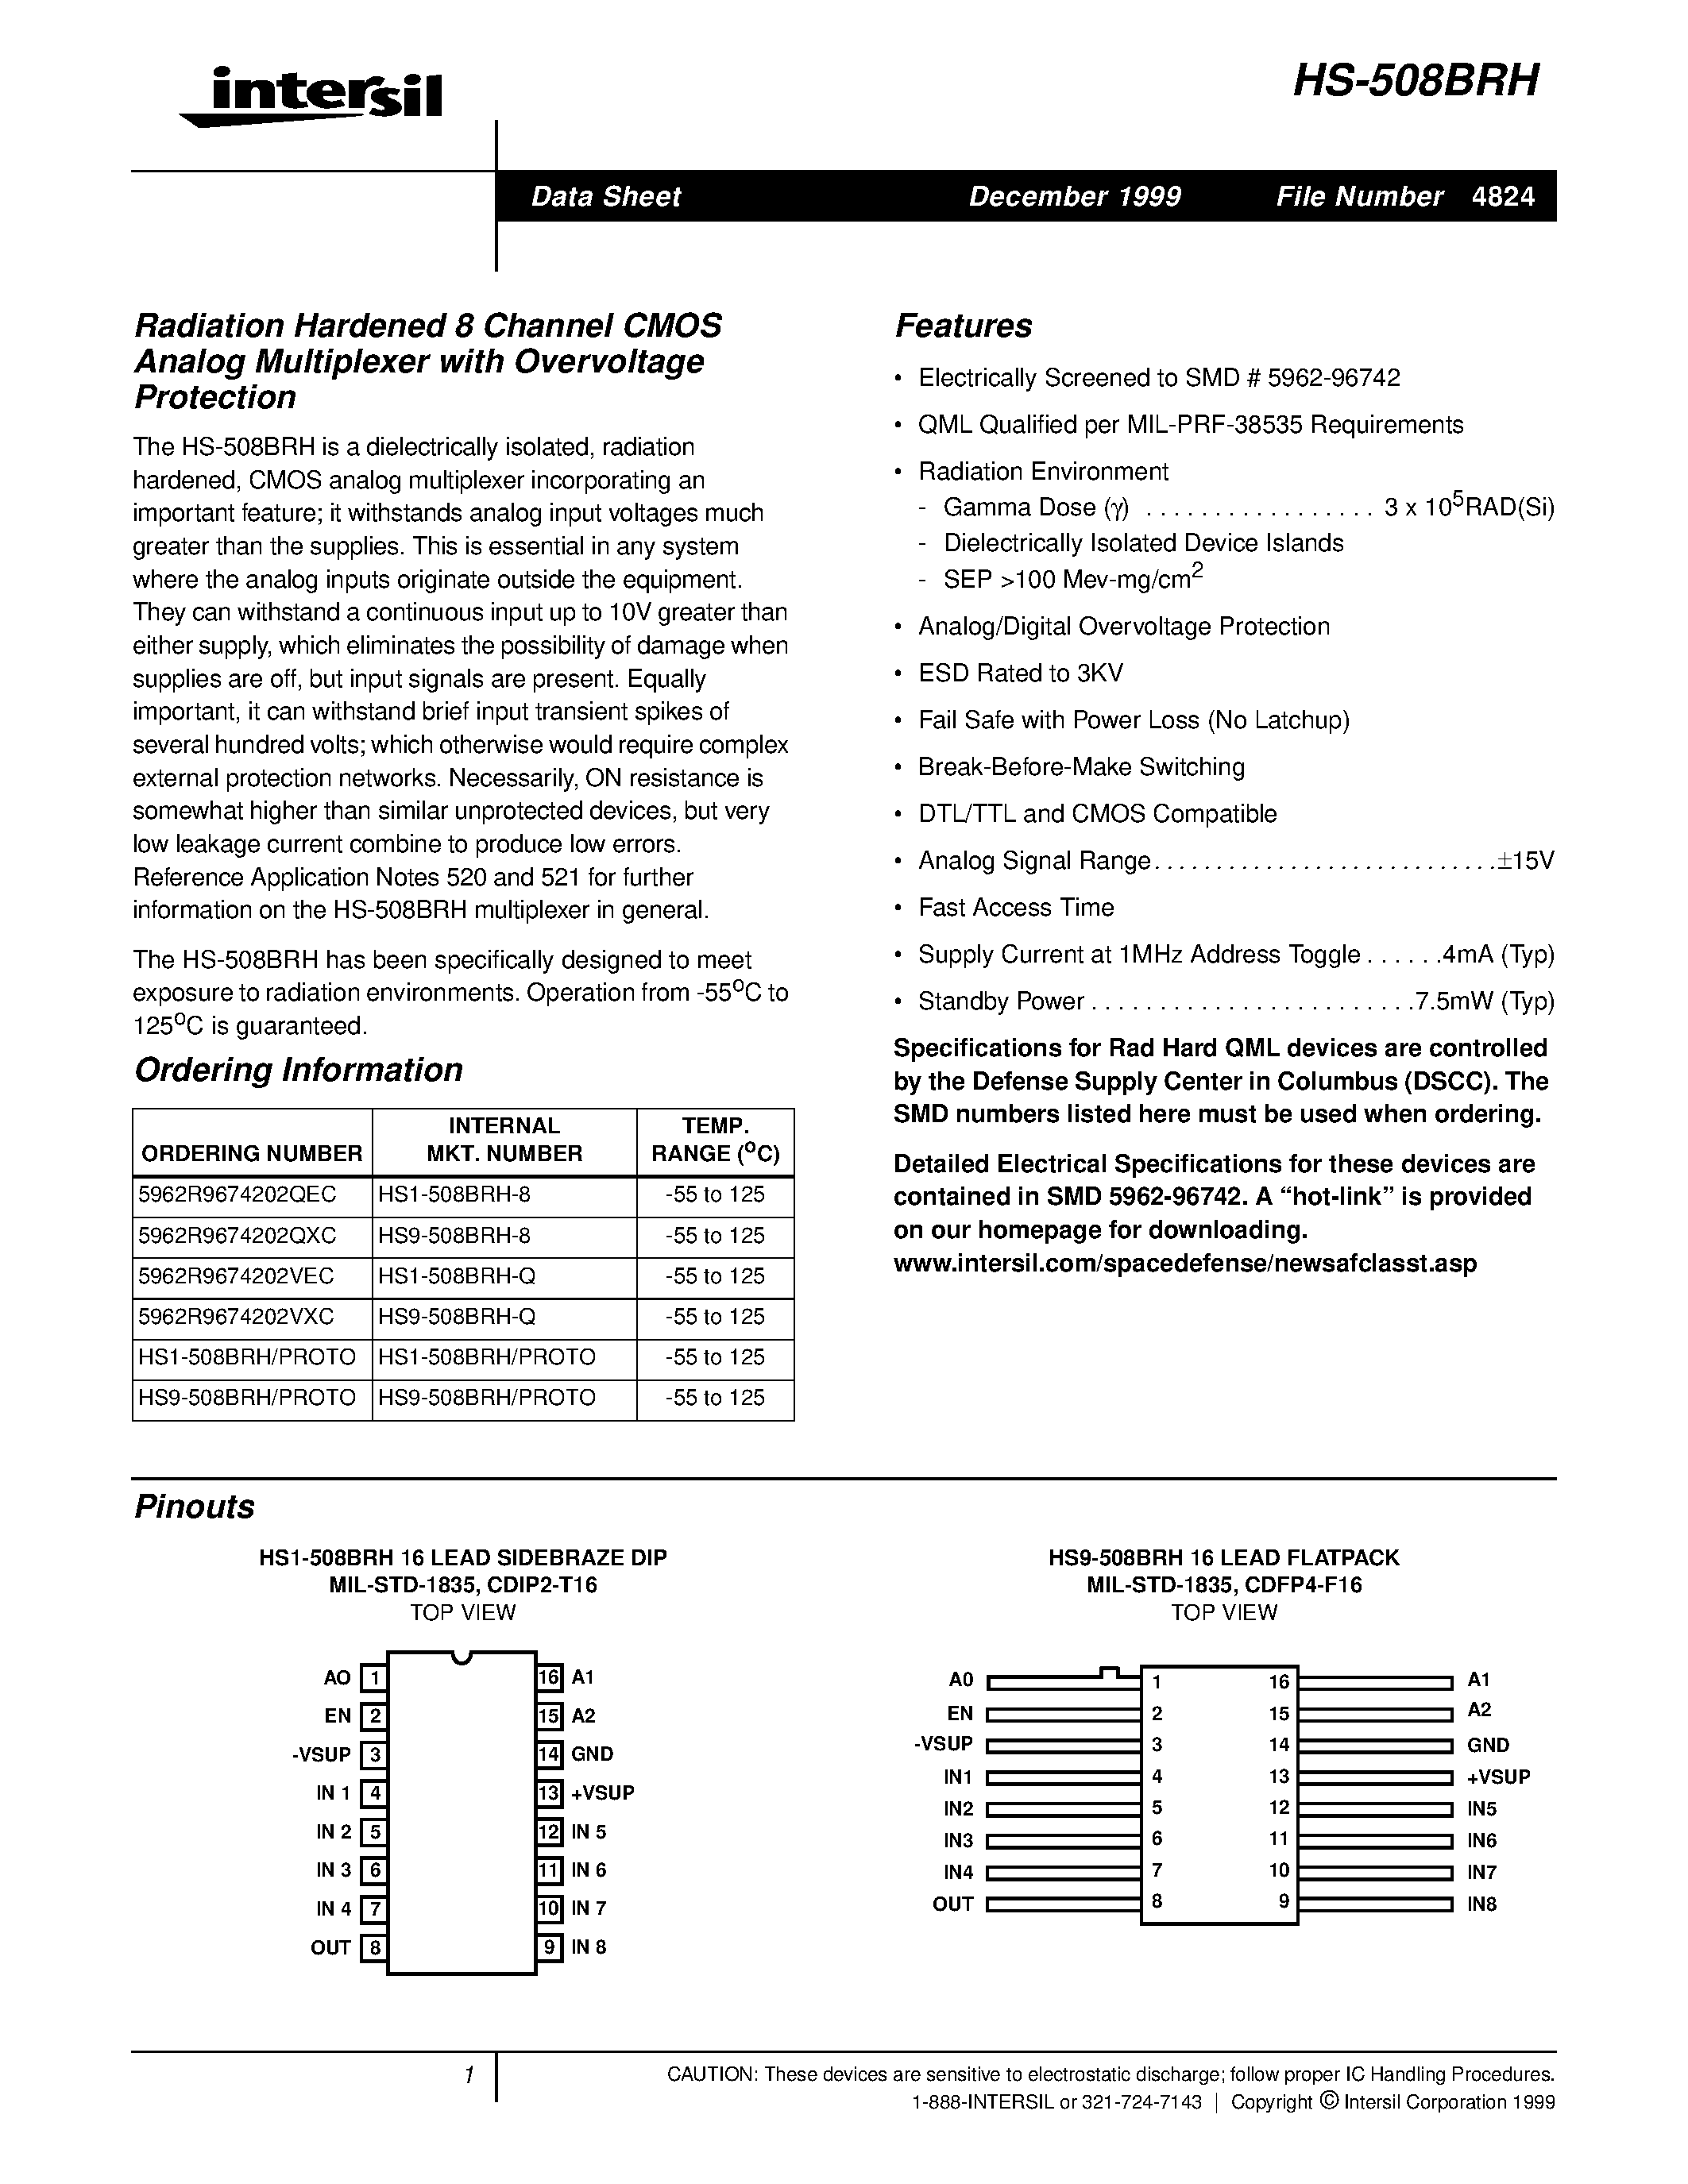 Datasheet HS9-508BRH-Q - Radiation Hardened 8 Channel CMOS Analog Multiplexer with Overvoltage Protection page 1